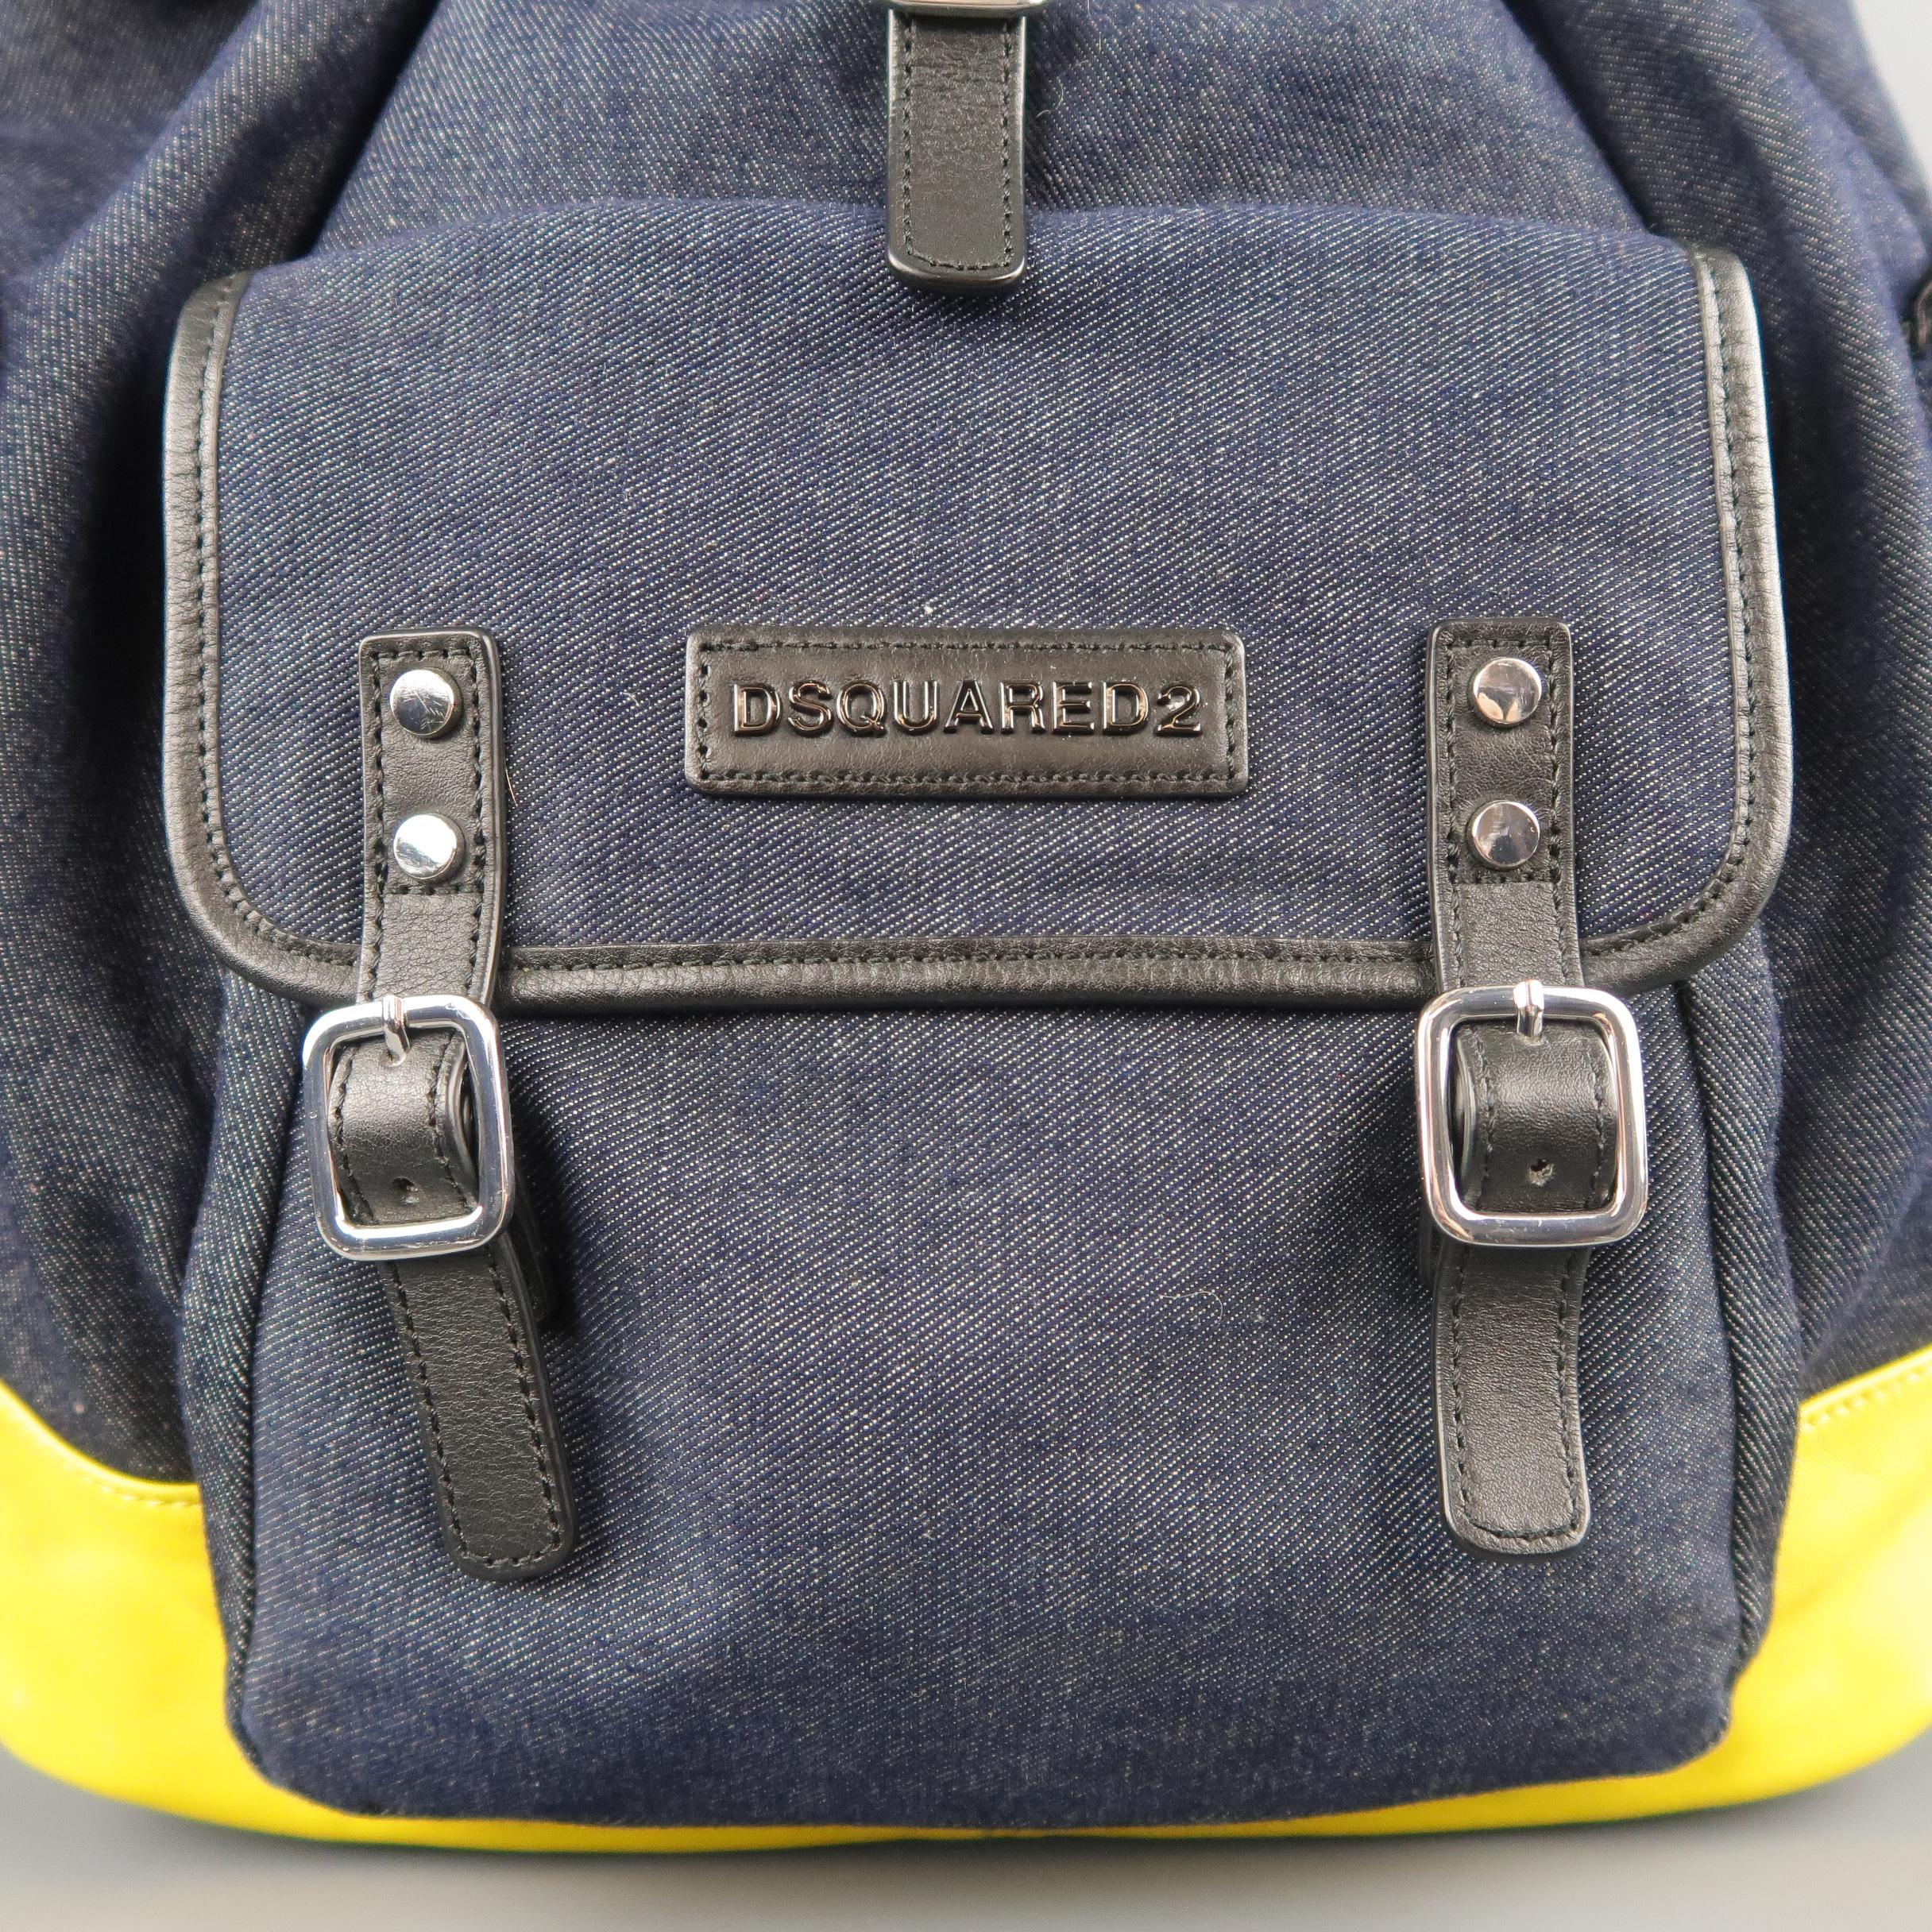 DSQUARED2 backpack comes in deep navy denim with black leather piping, side flap pockets, frontal pouch flap pocket with belt closures and logo, drawstring top with flap belt closure, top handle, and yellow leather bottom panel. Light wear on yellow